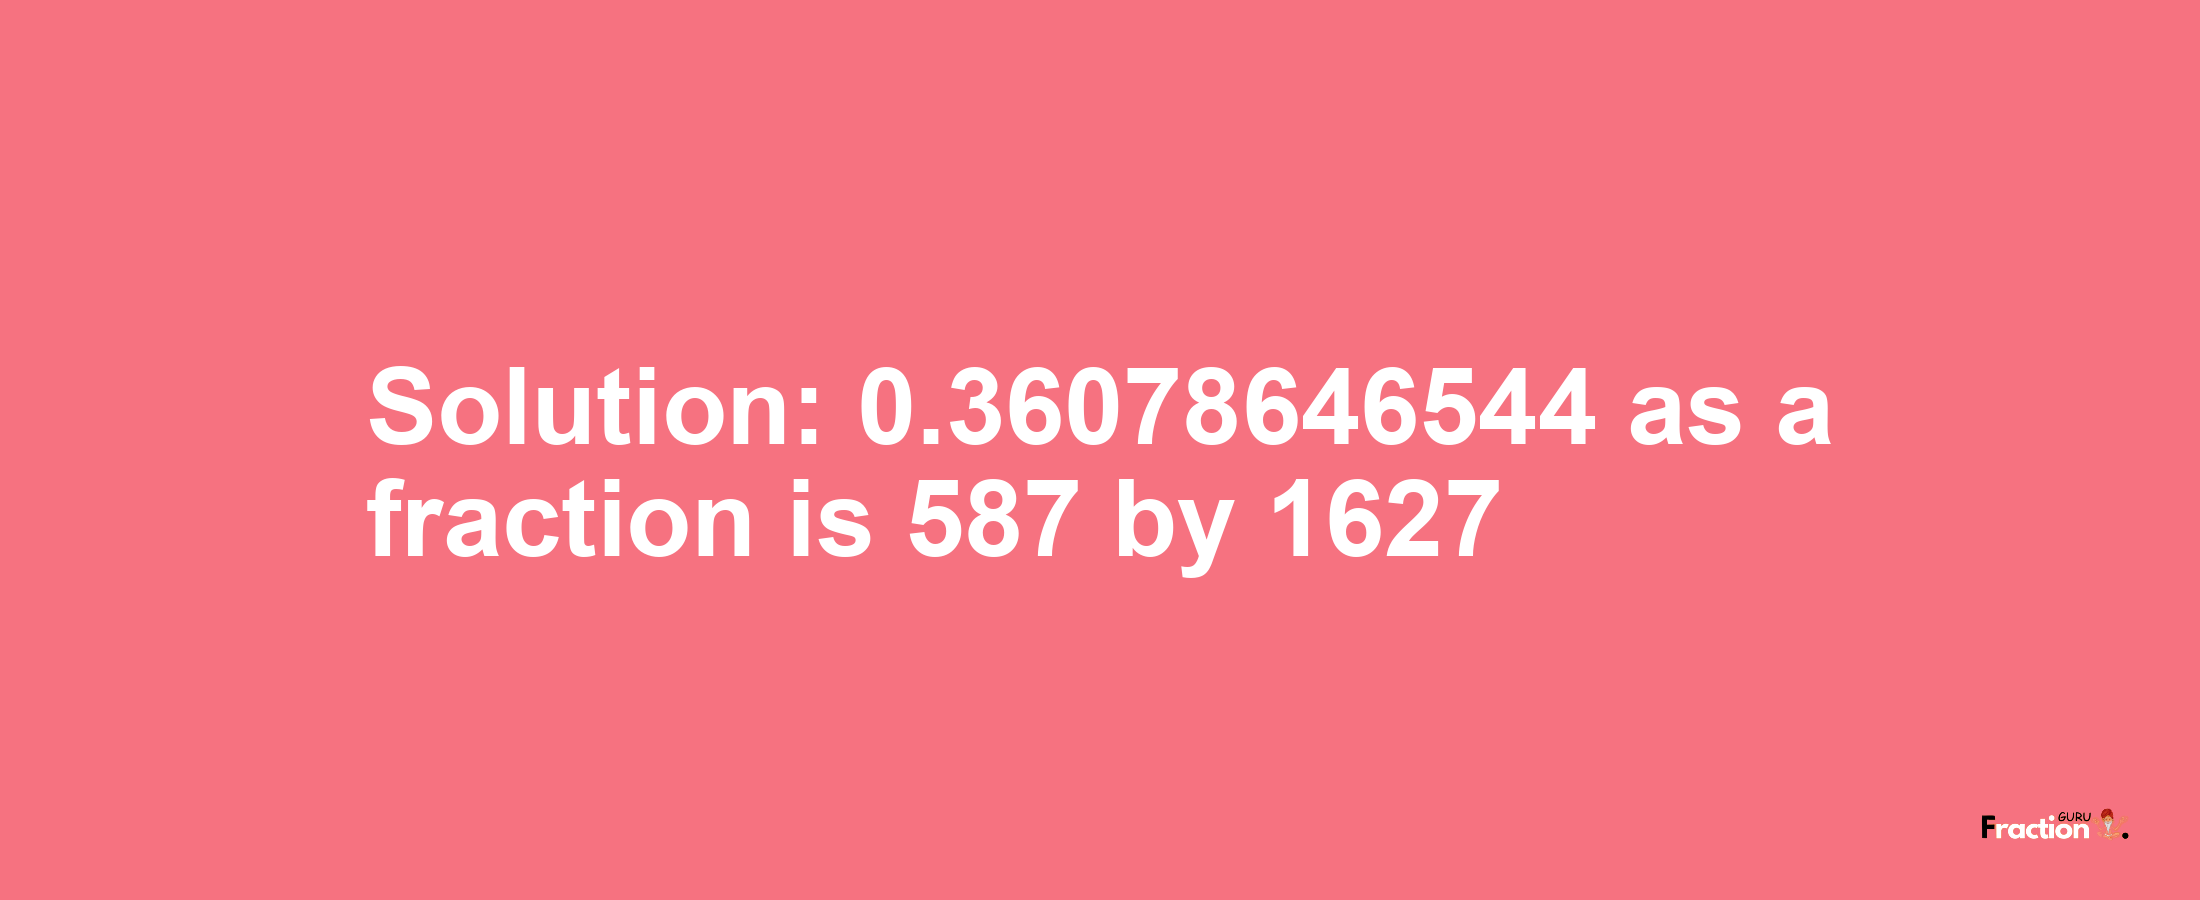 Solution:0.36078646544 as a fraction is 587/1627